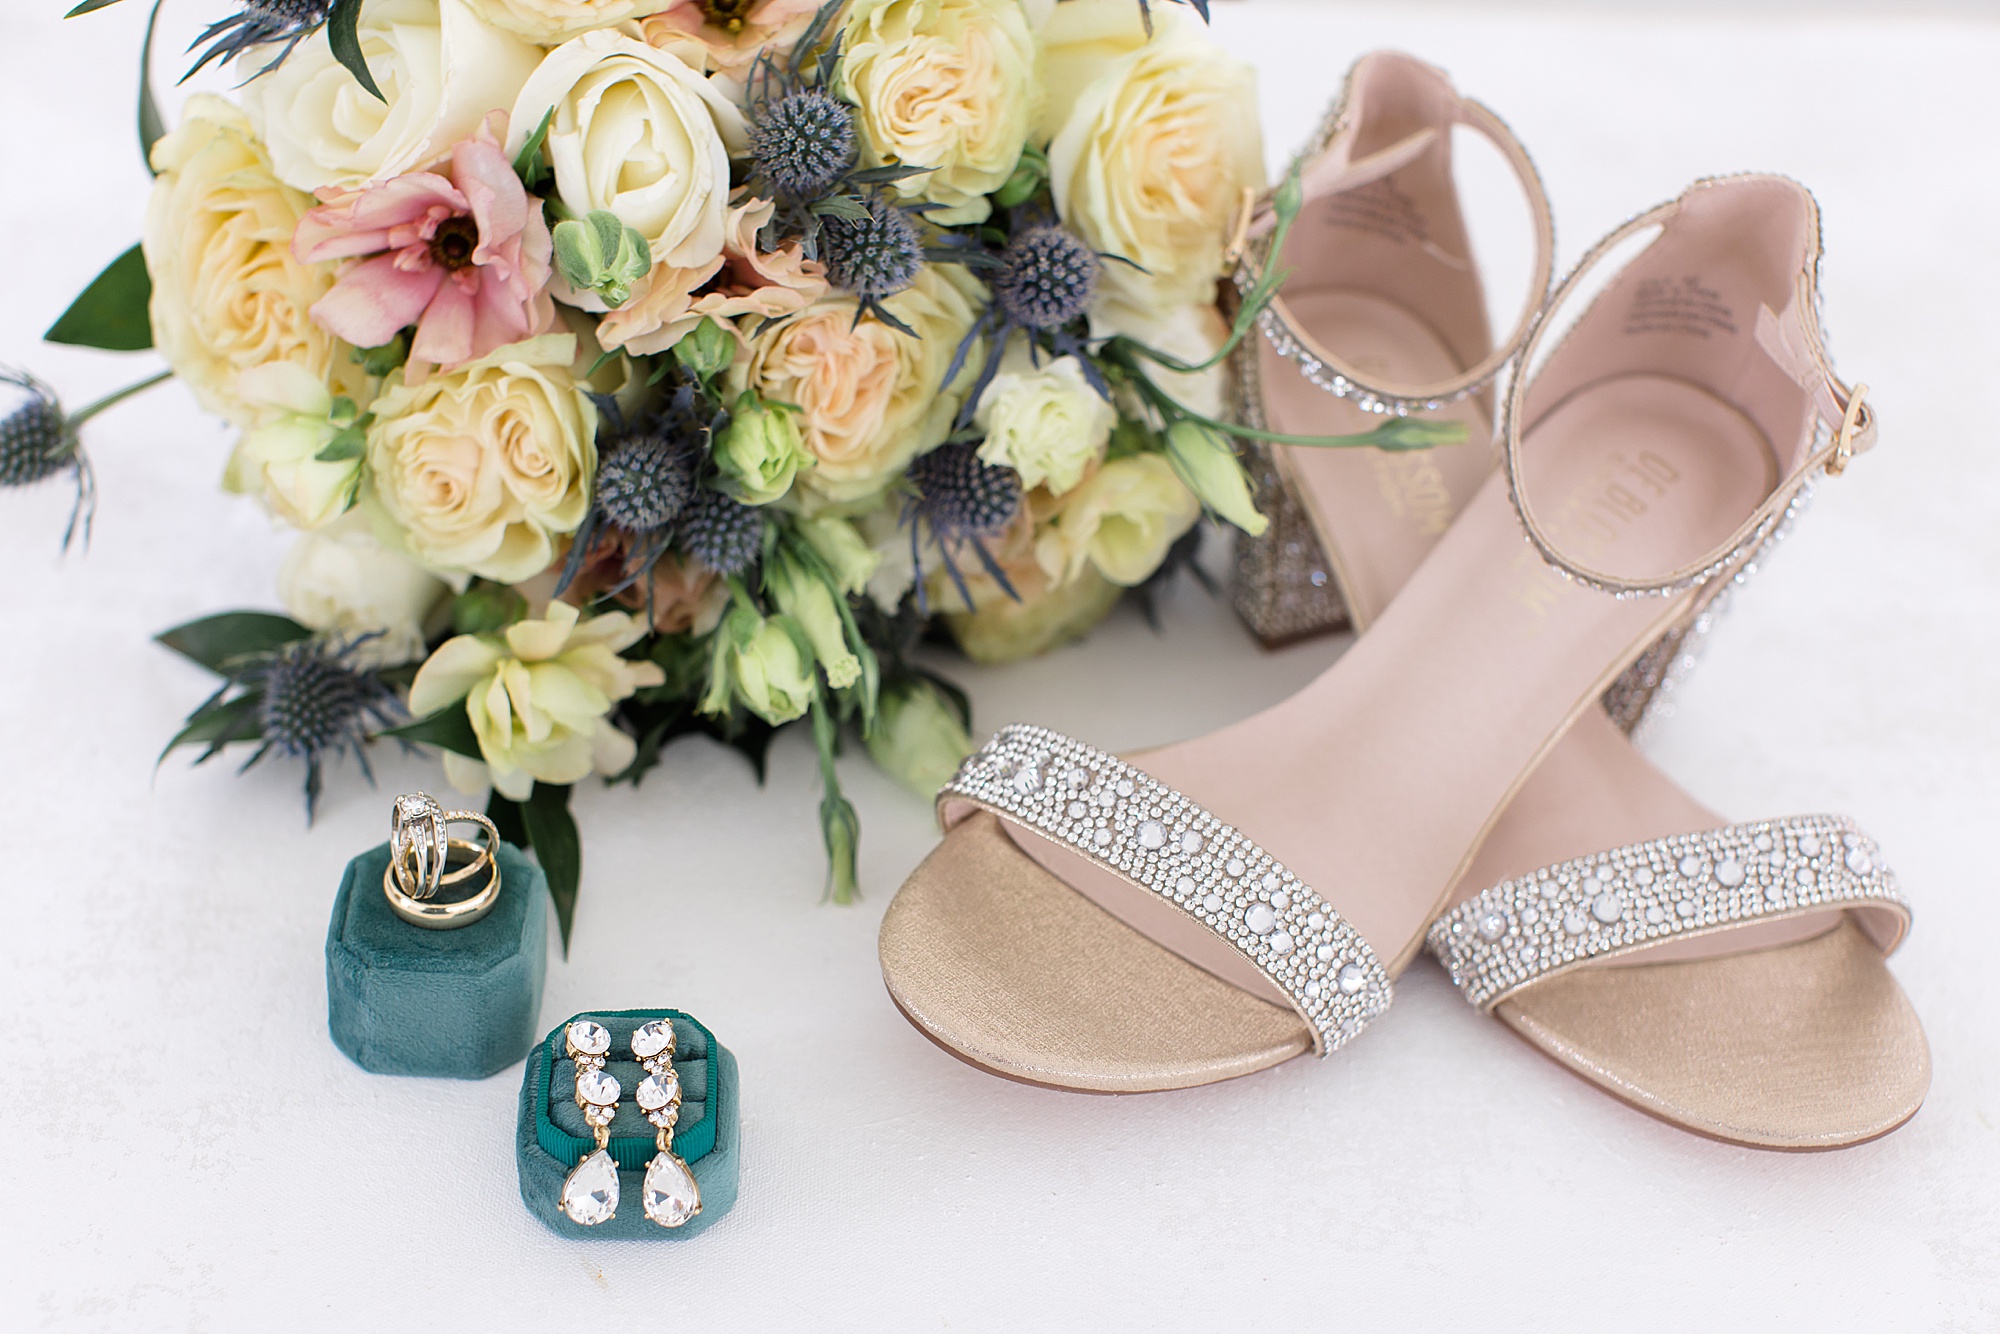 bride's details and jewelry on emerald box